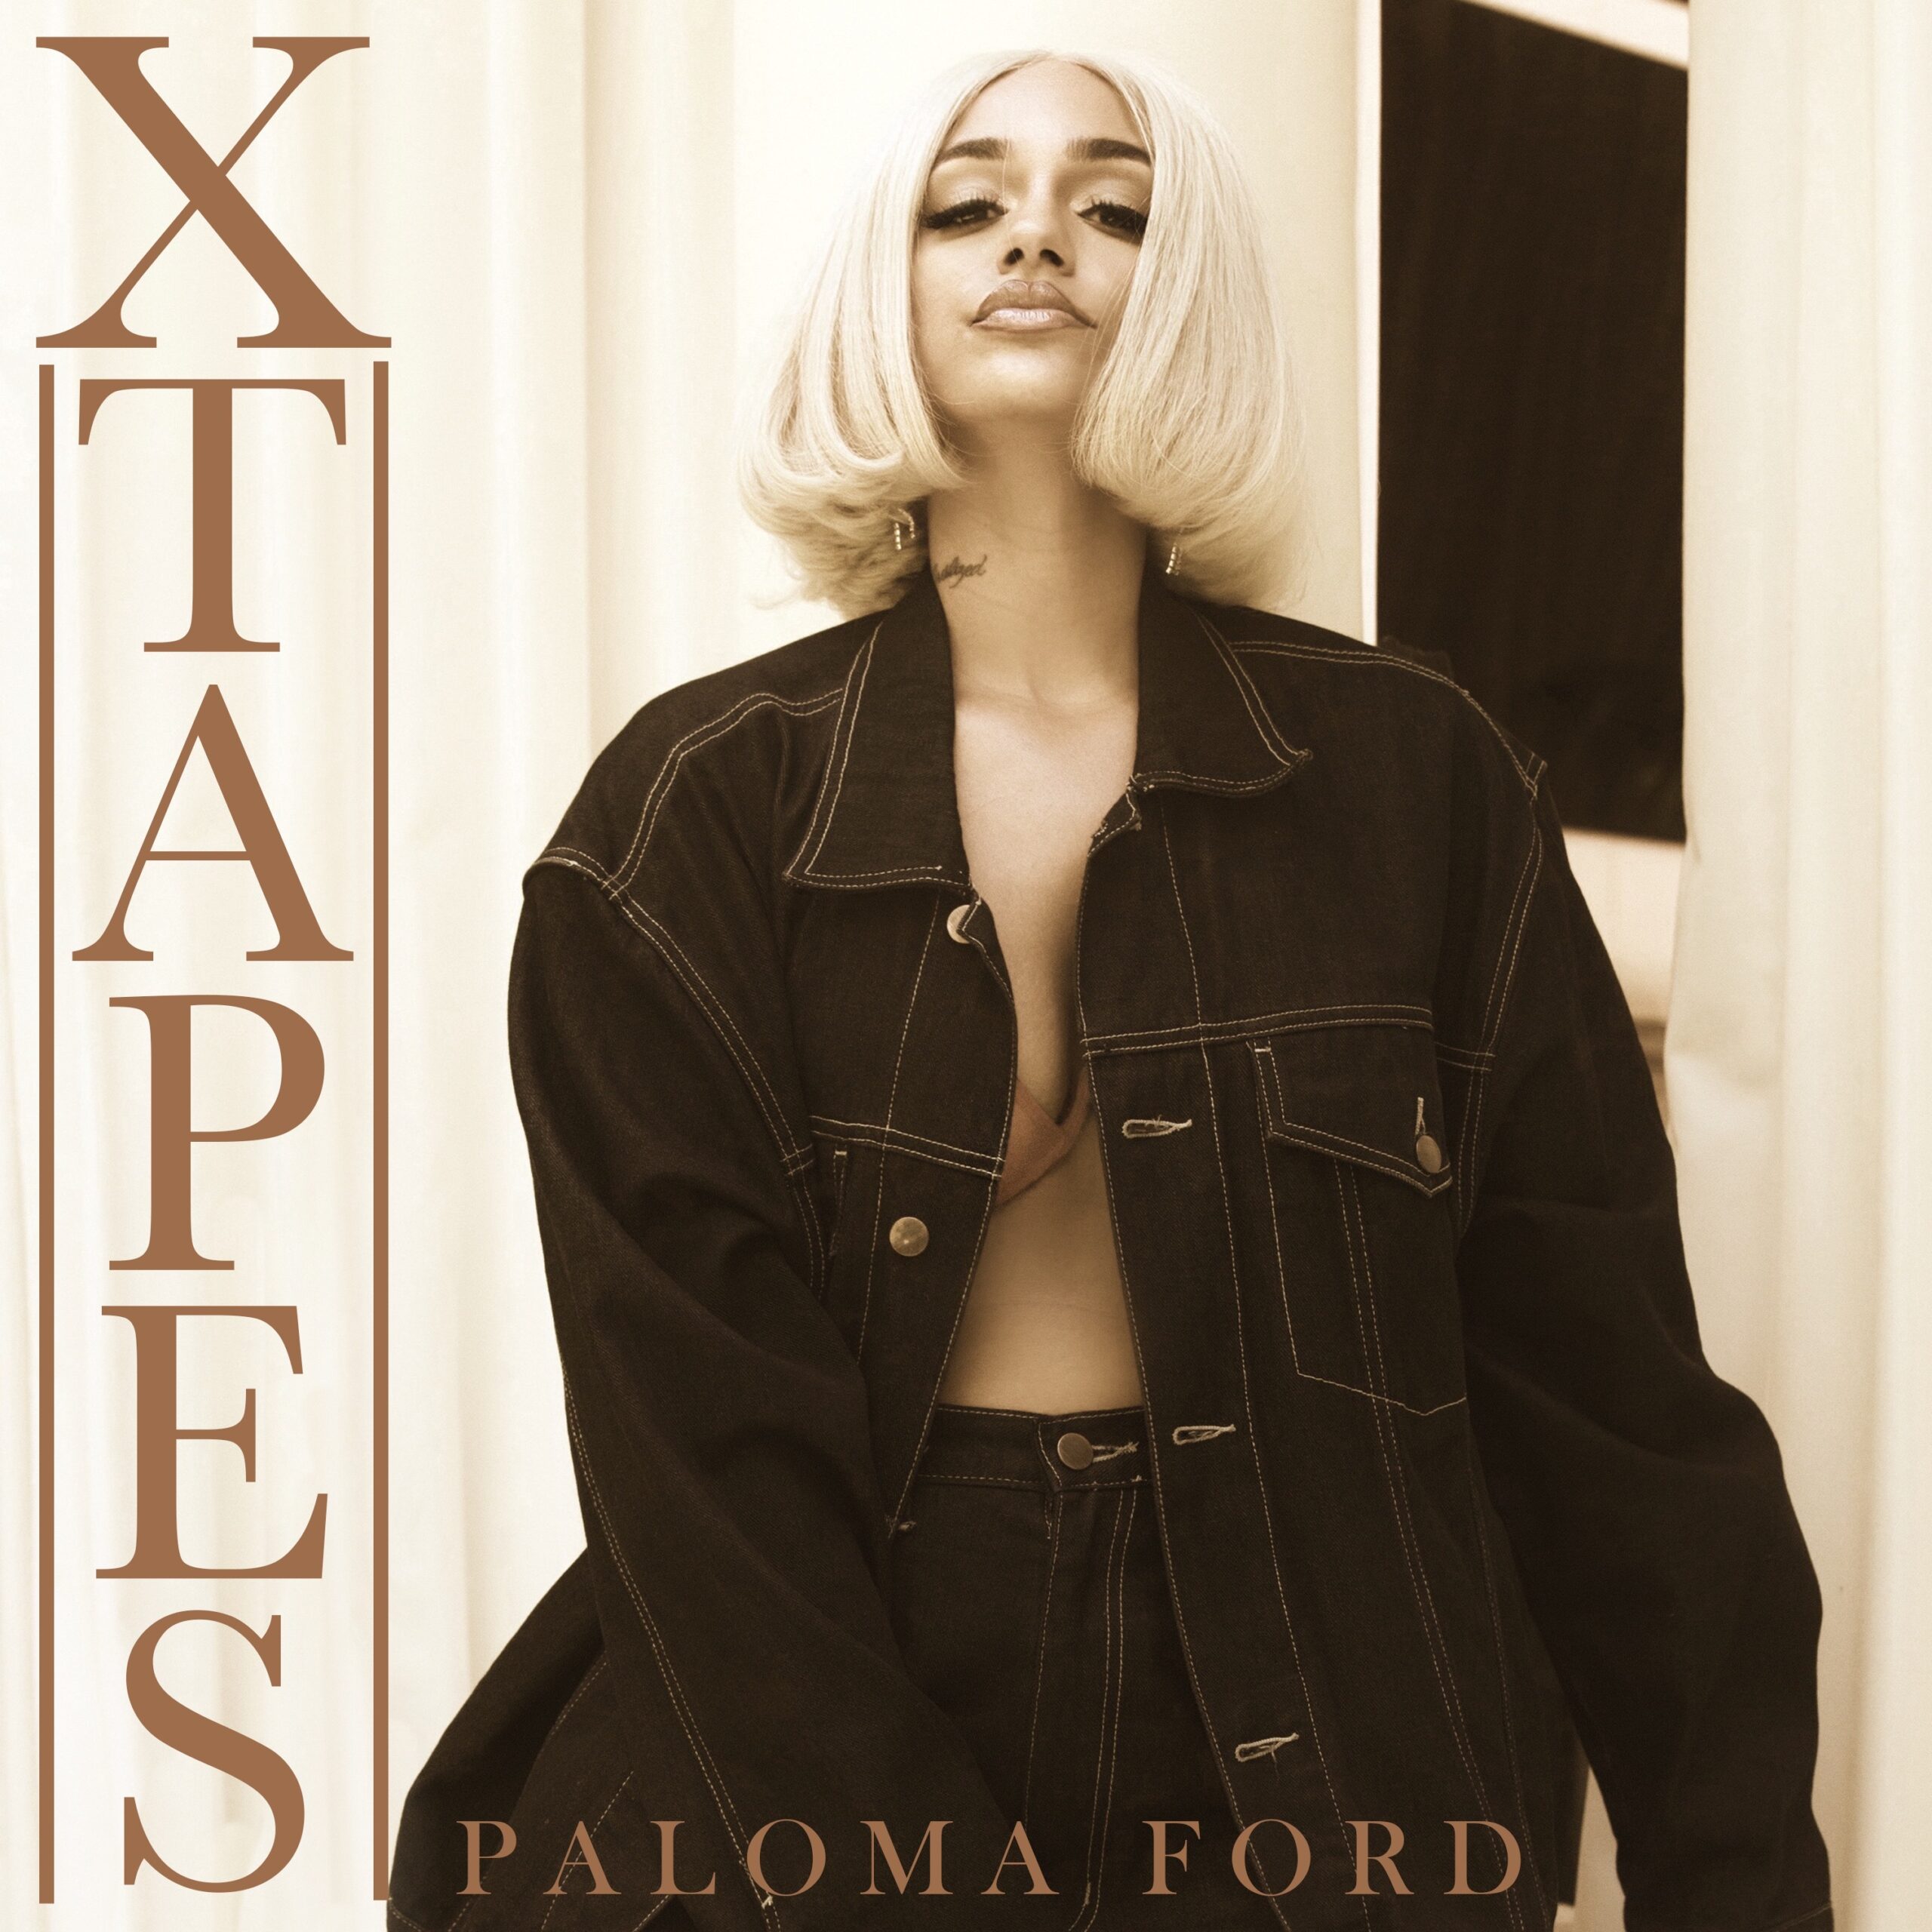 New Music: Paloma Ford - X Tapes (EP)